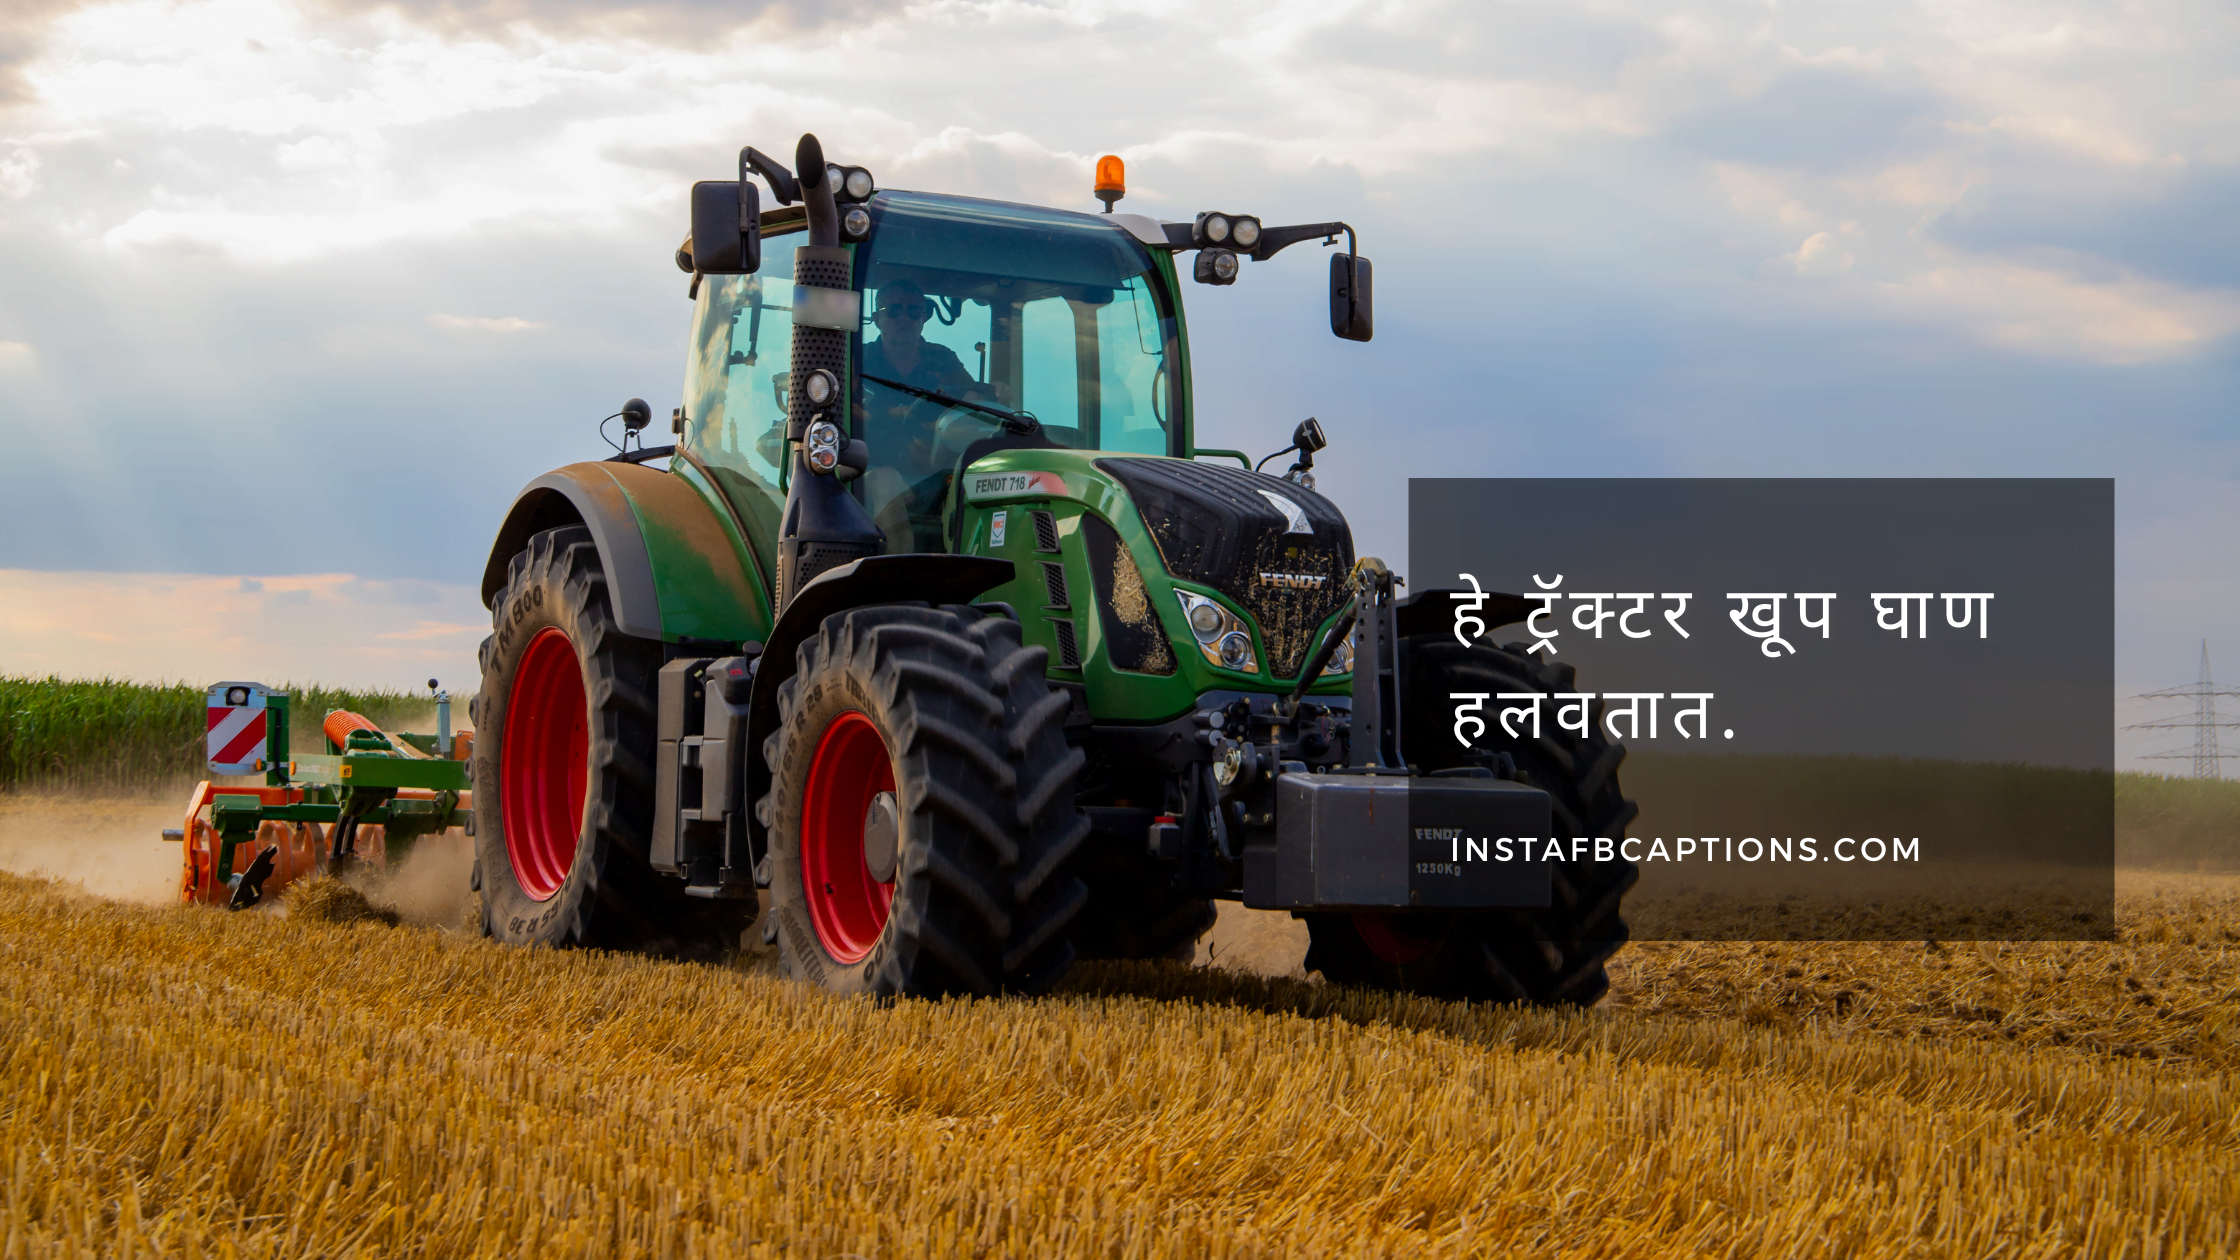 Cute Tractor Captions In Marathi  - Cute Tractor Captions in Marathi  - Tractor Instagram Captions Quotes in 2022